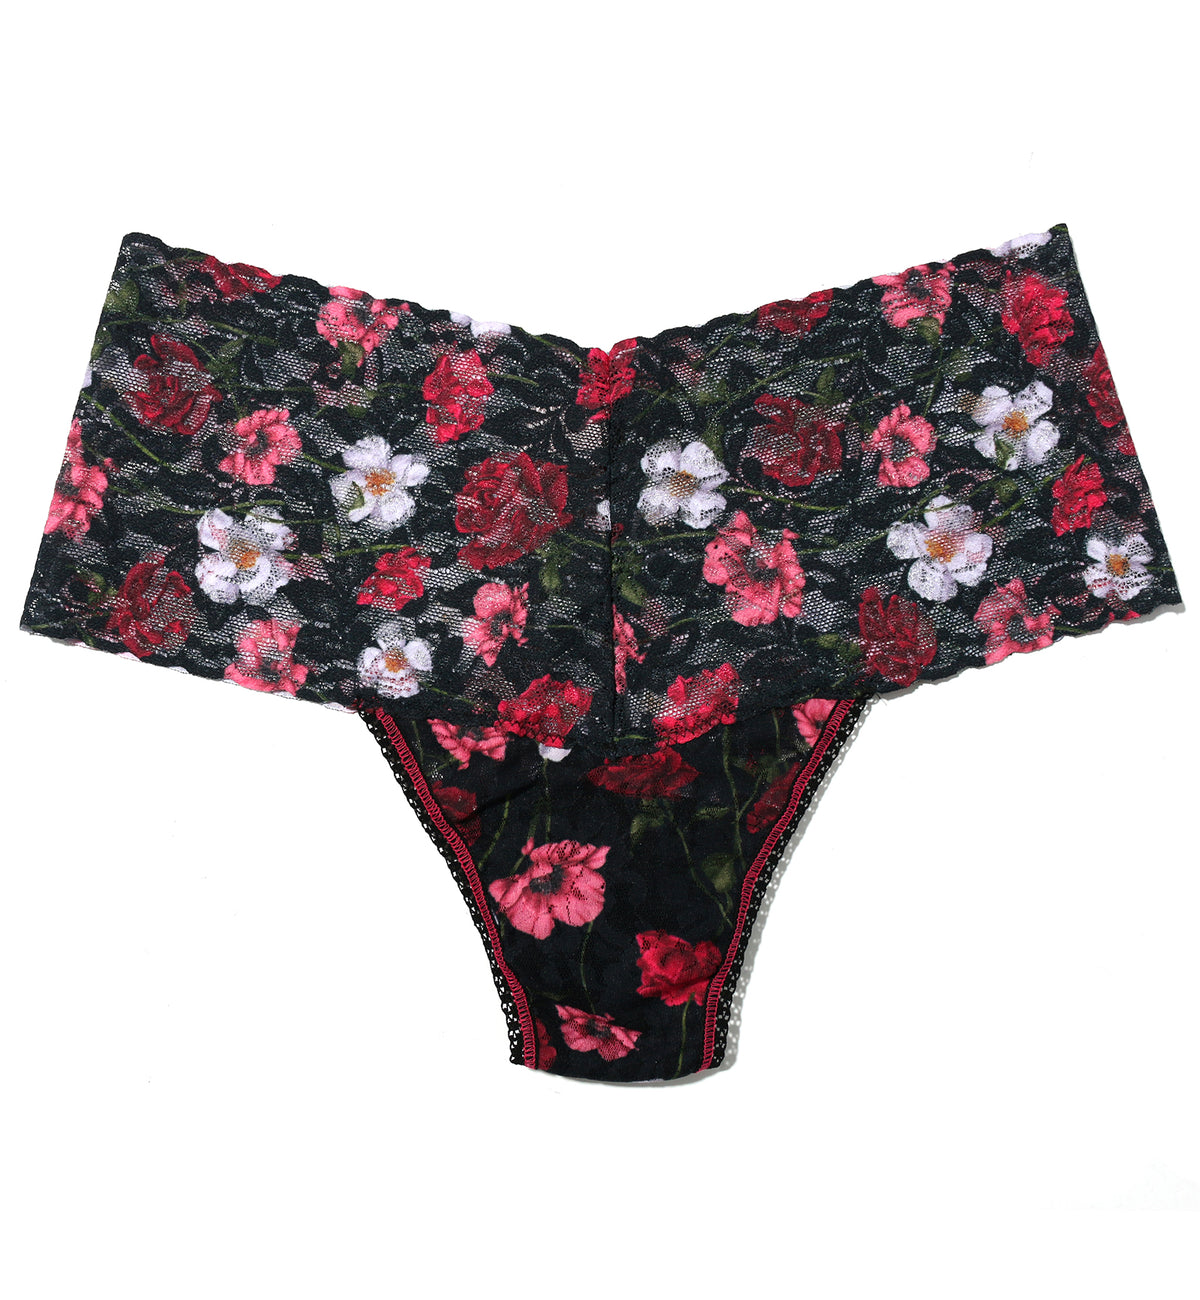 Hanky Panky High-Waist Retro Lace Printed Thong (PR9K1926),Am I Dreaming - Am I Dreaming,One Size